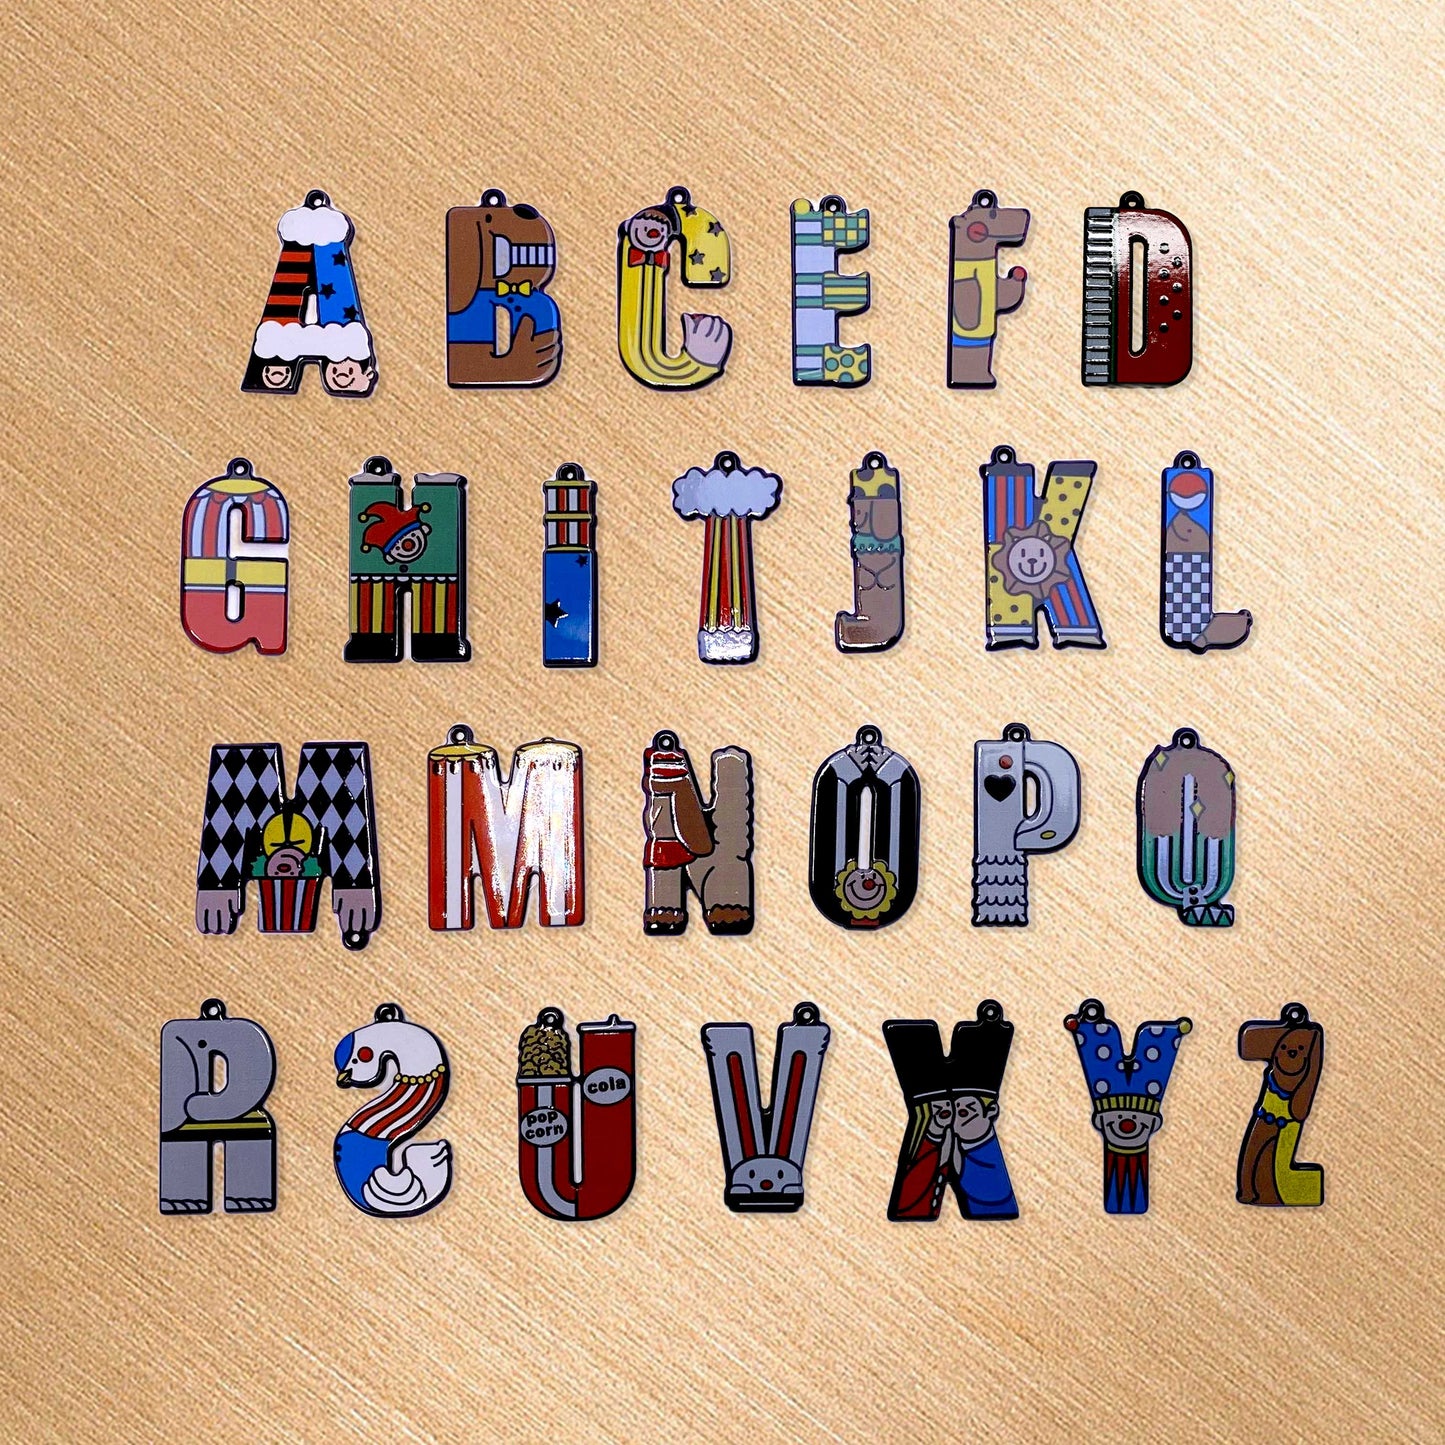 NEW [A3087] Alphabet Game - Acrylic Drilled Cards